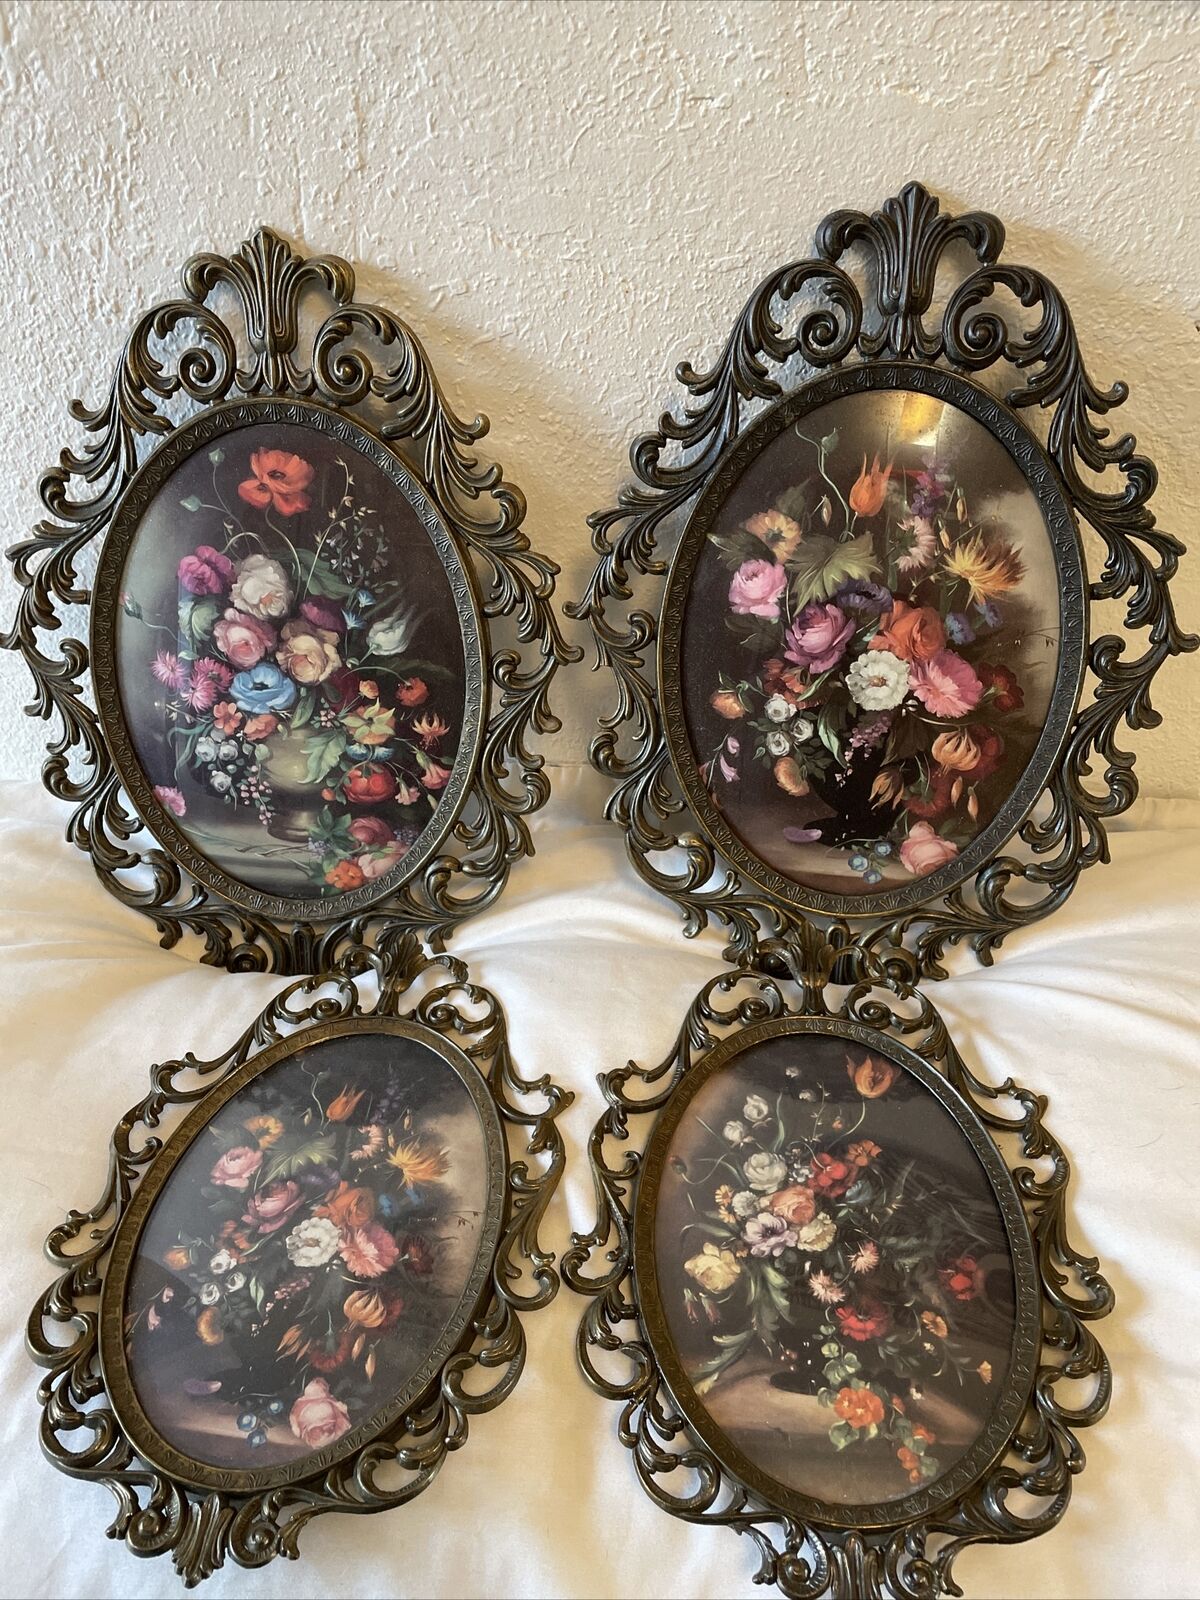 VINTAGE VICTORIAN WALL DECOR MADE IN ITALY